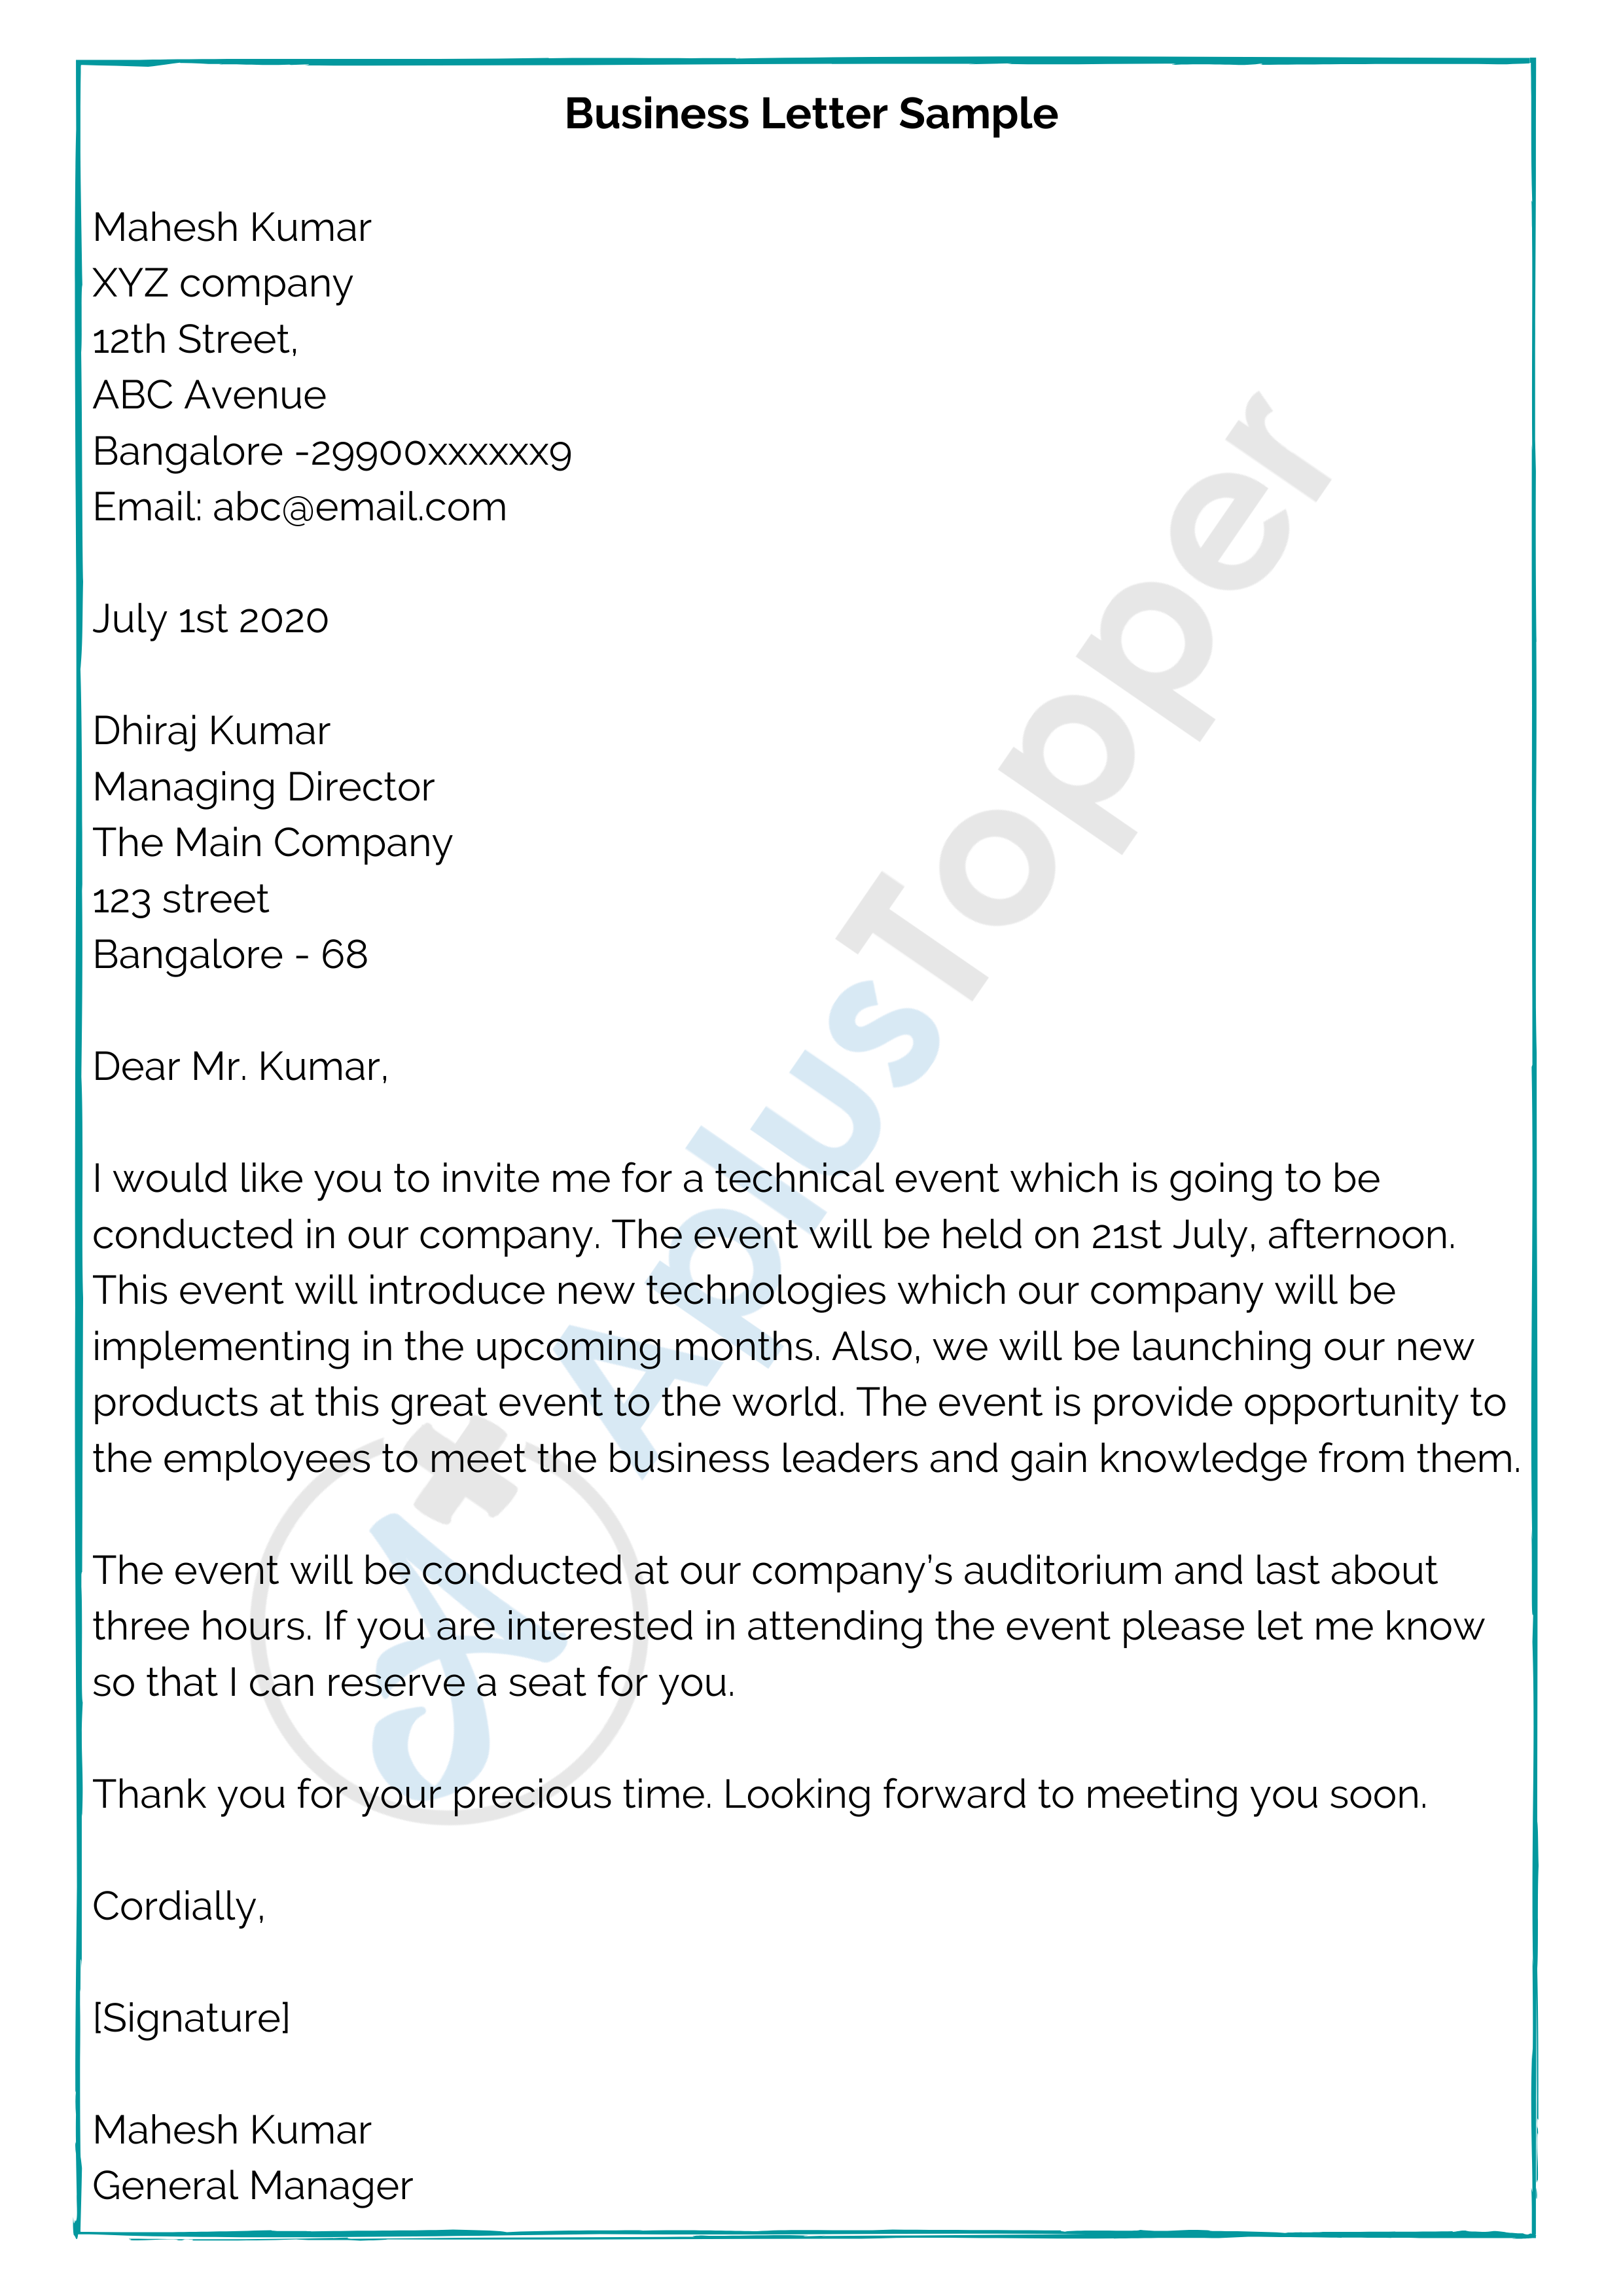 Business Letter  Format, Samples, How To Write Business Letter